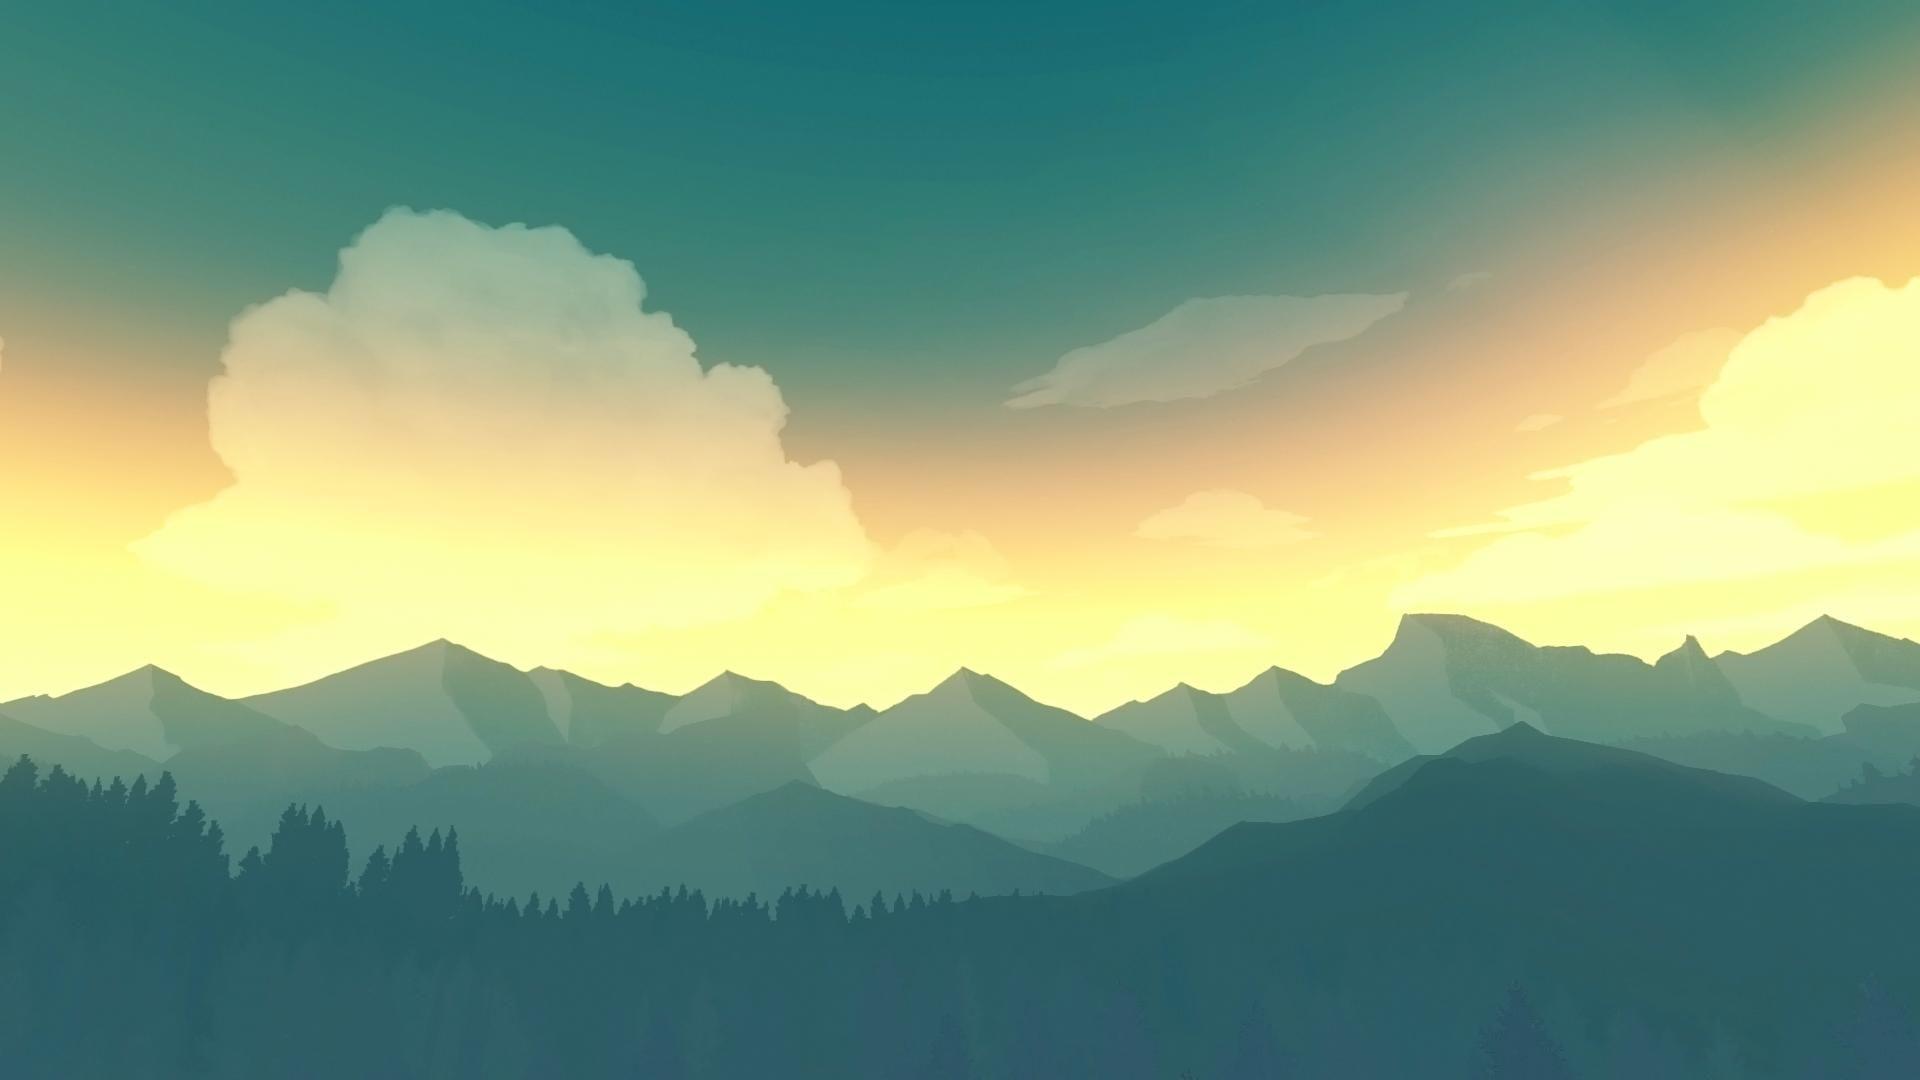 Firewatch is a beautiful game. Gaming. Fantasy city